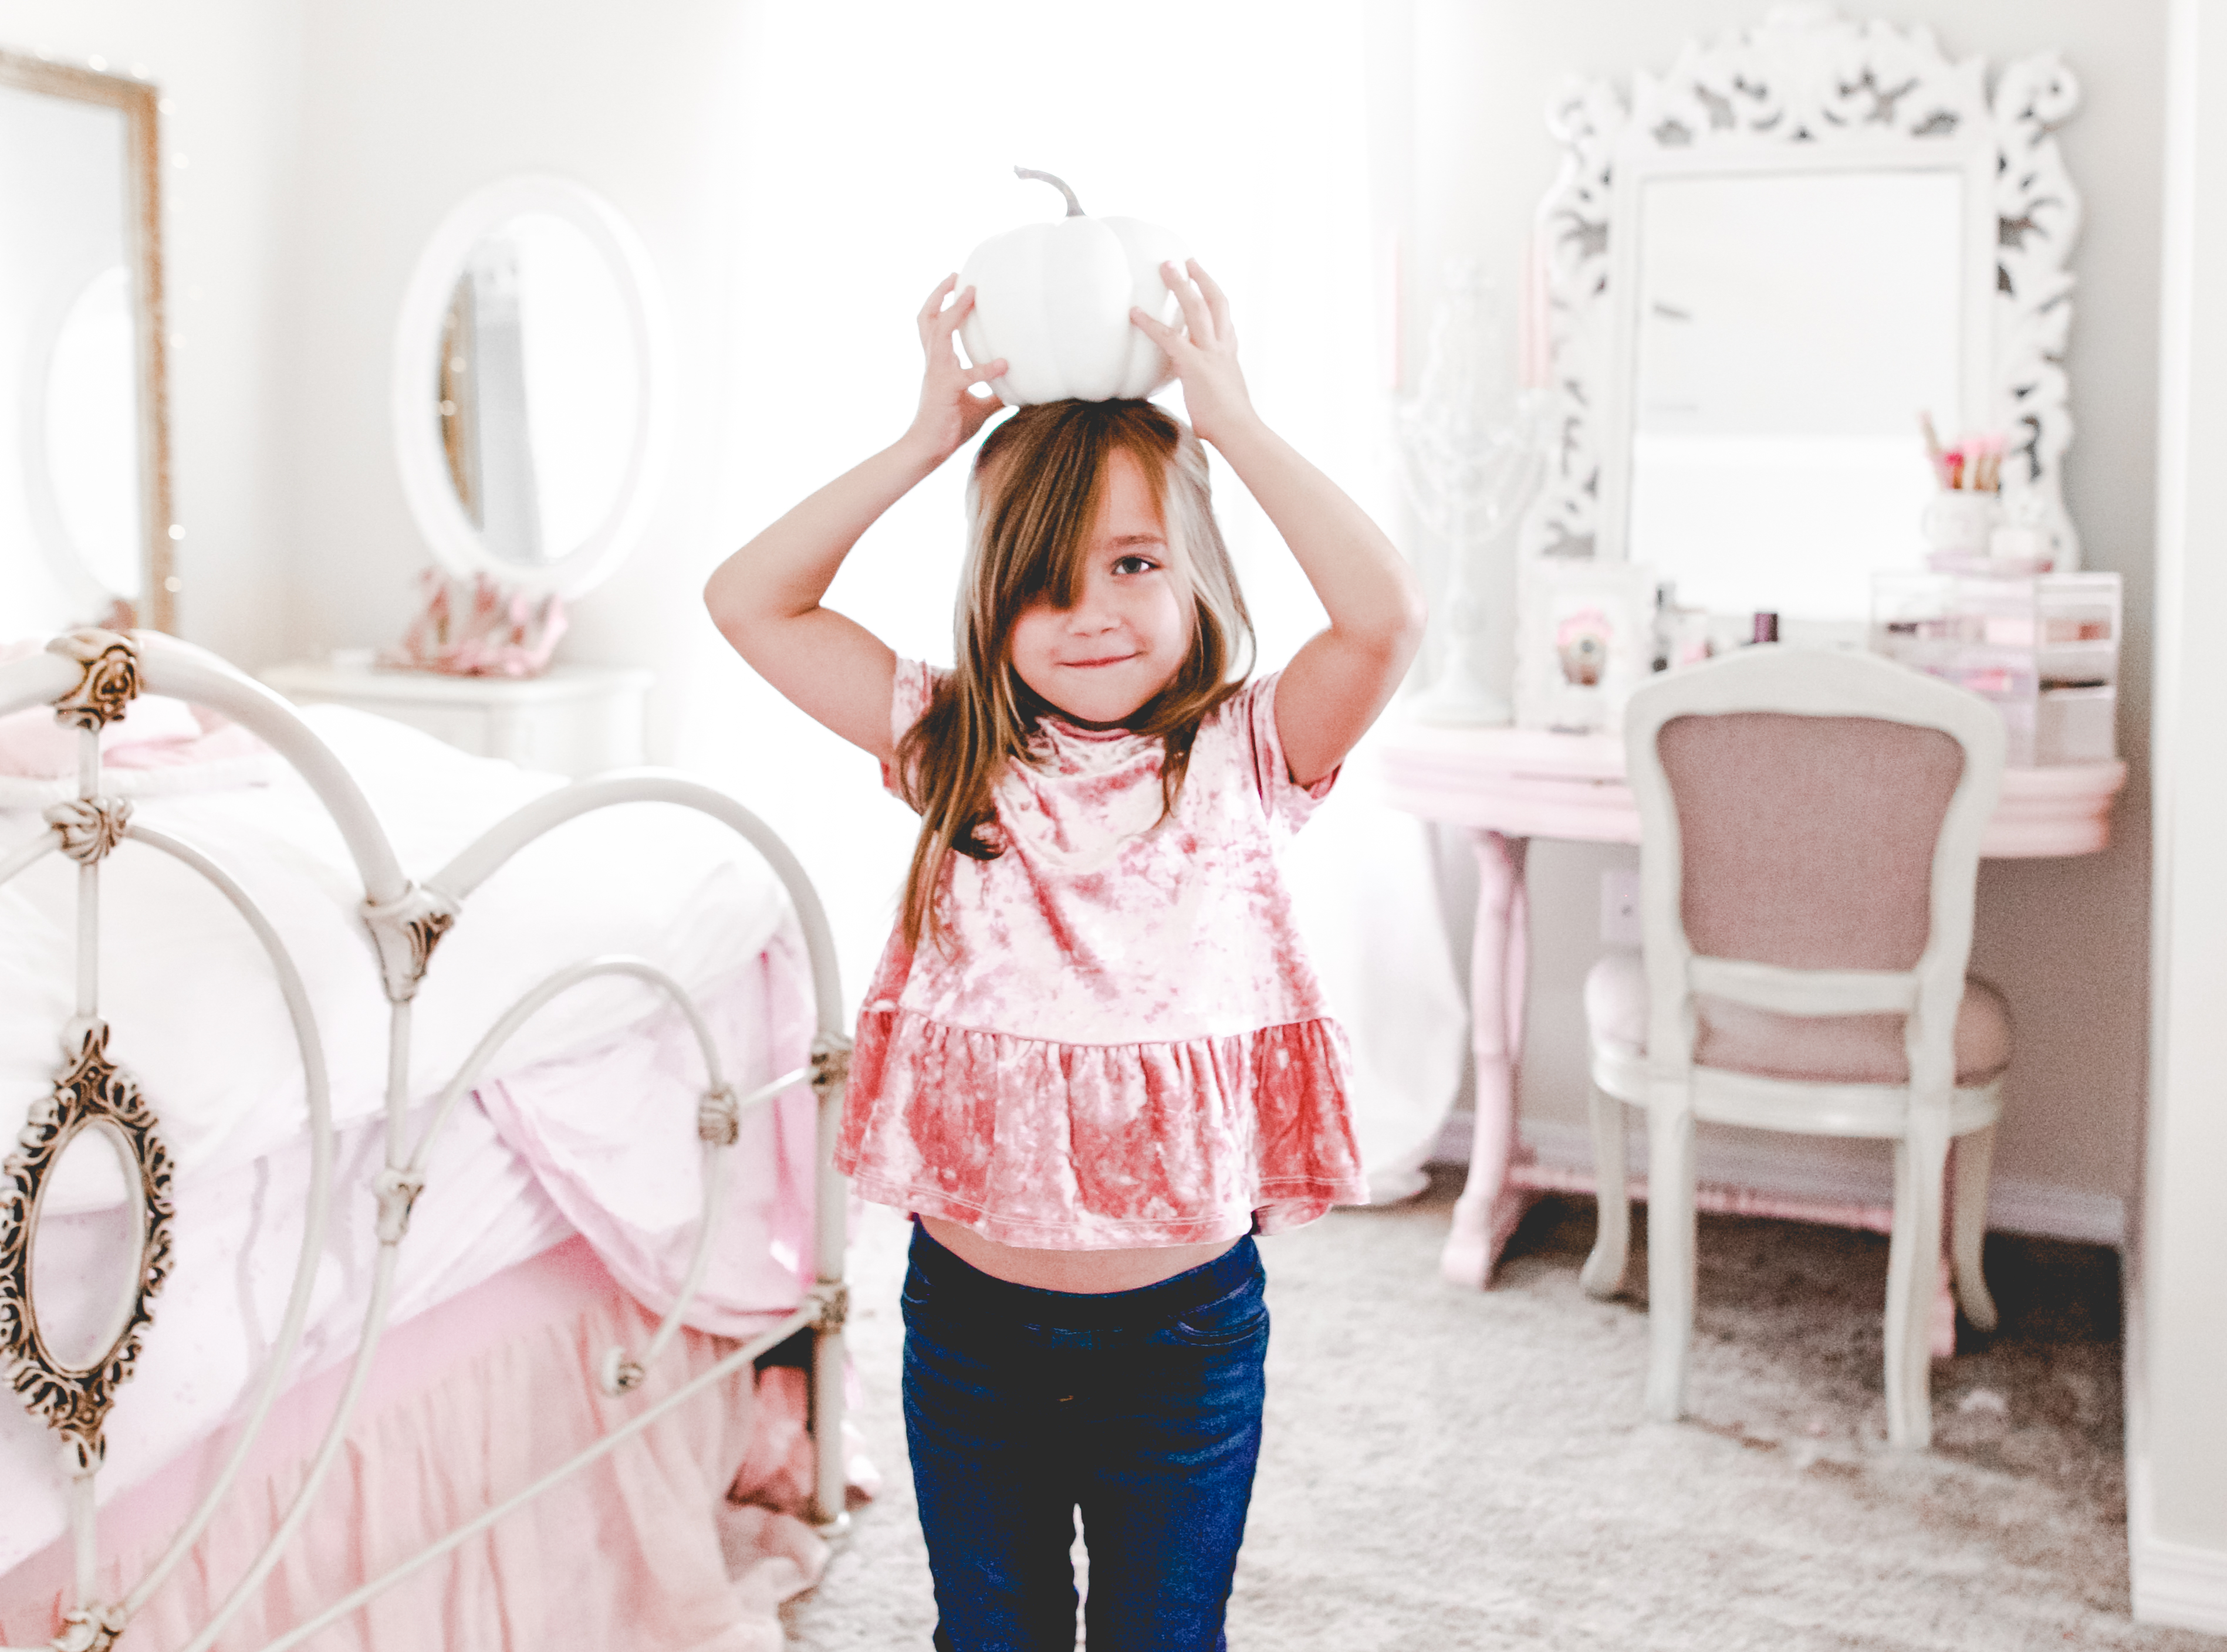 Chloe’s Very Own Fall Fashion Post Feat Fabkids